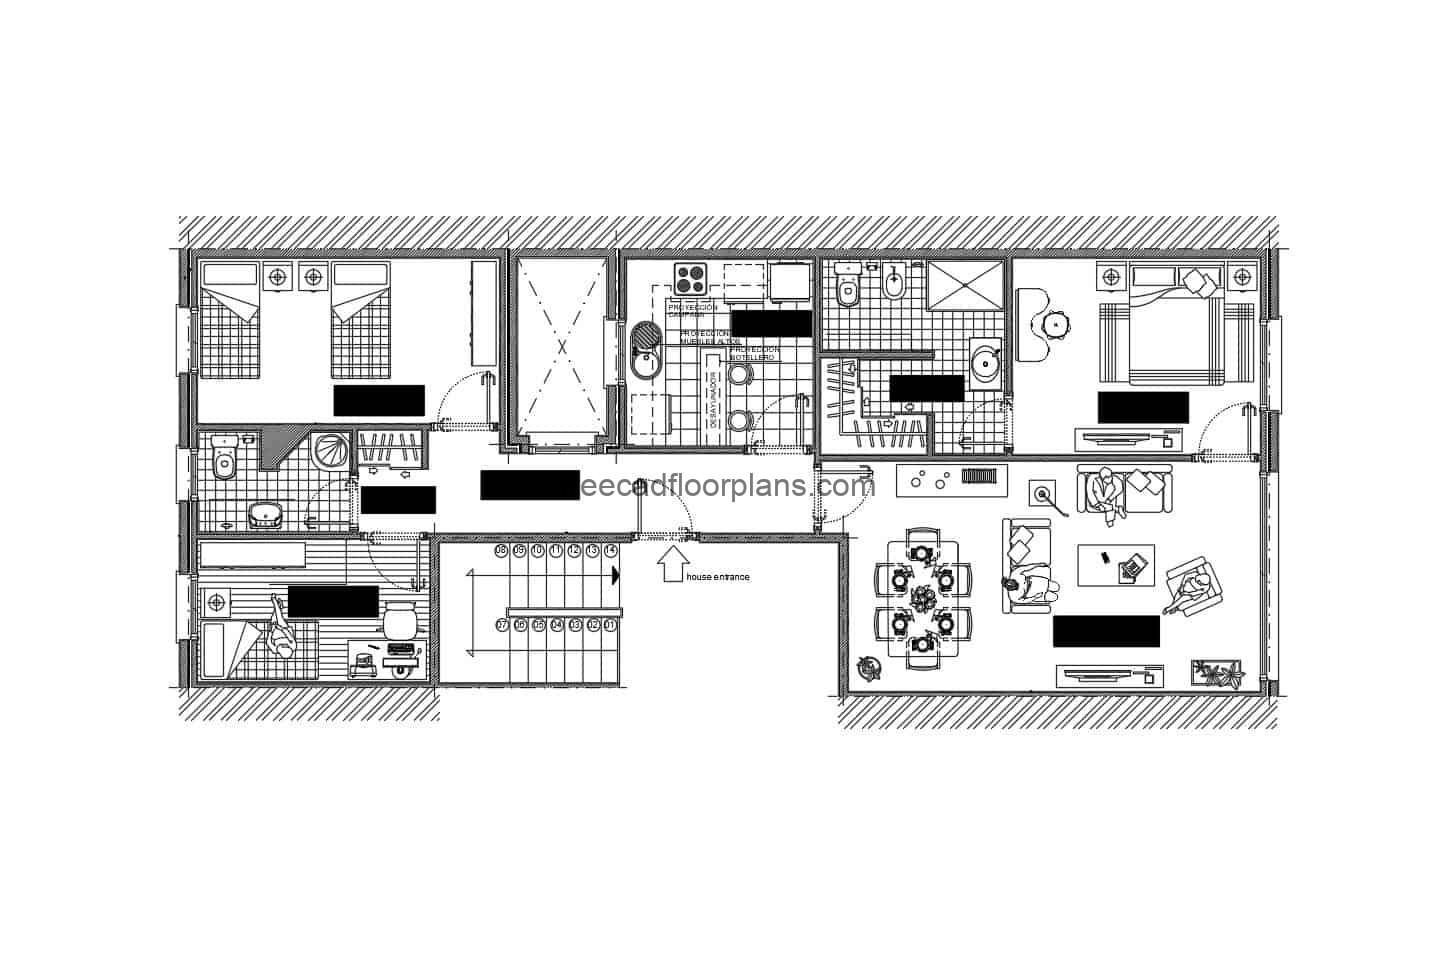 Simple residential block architectural design in autocad format, two rooms, living room, kitchen and dining room, architectural plan and dimensioned, architectural details